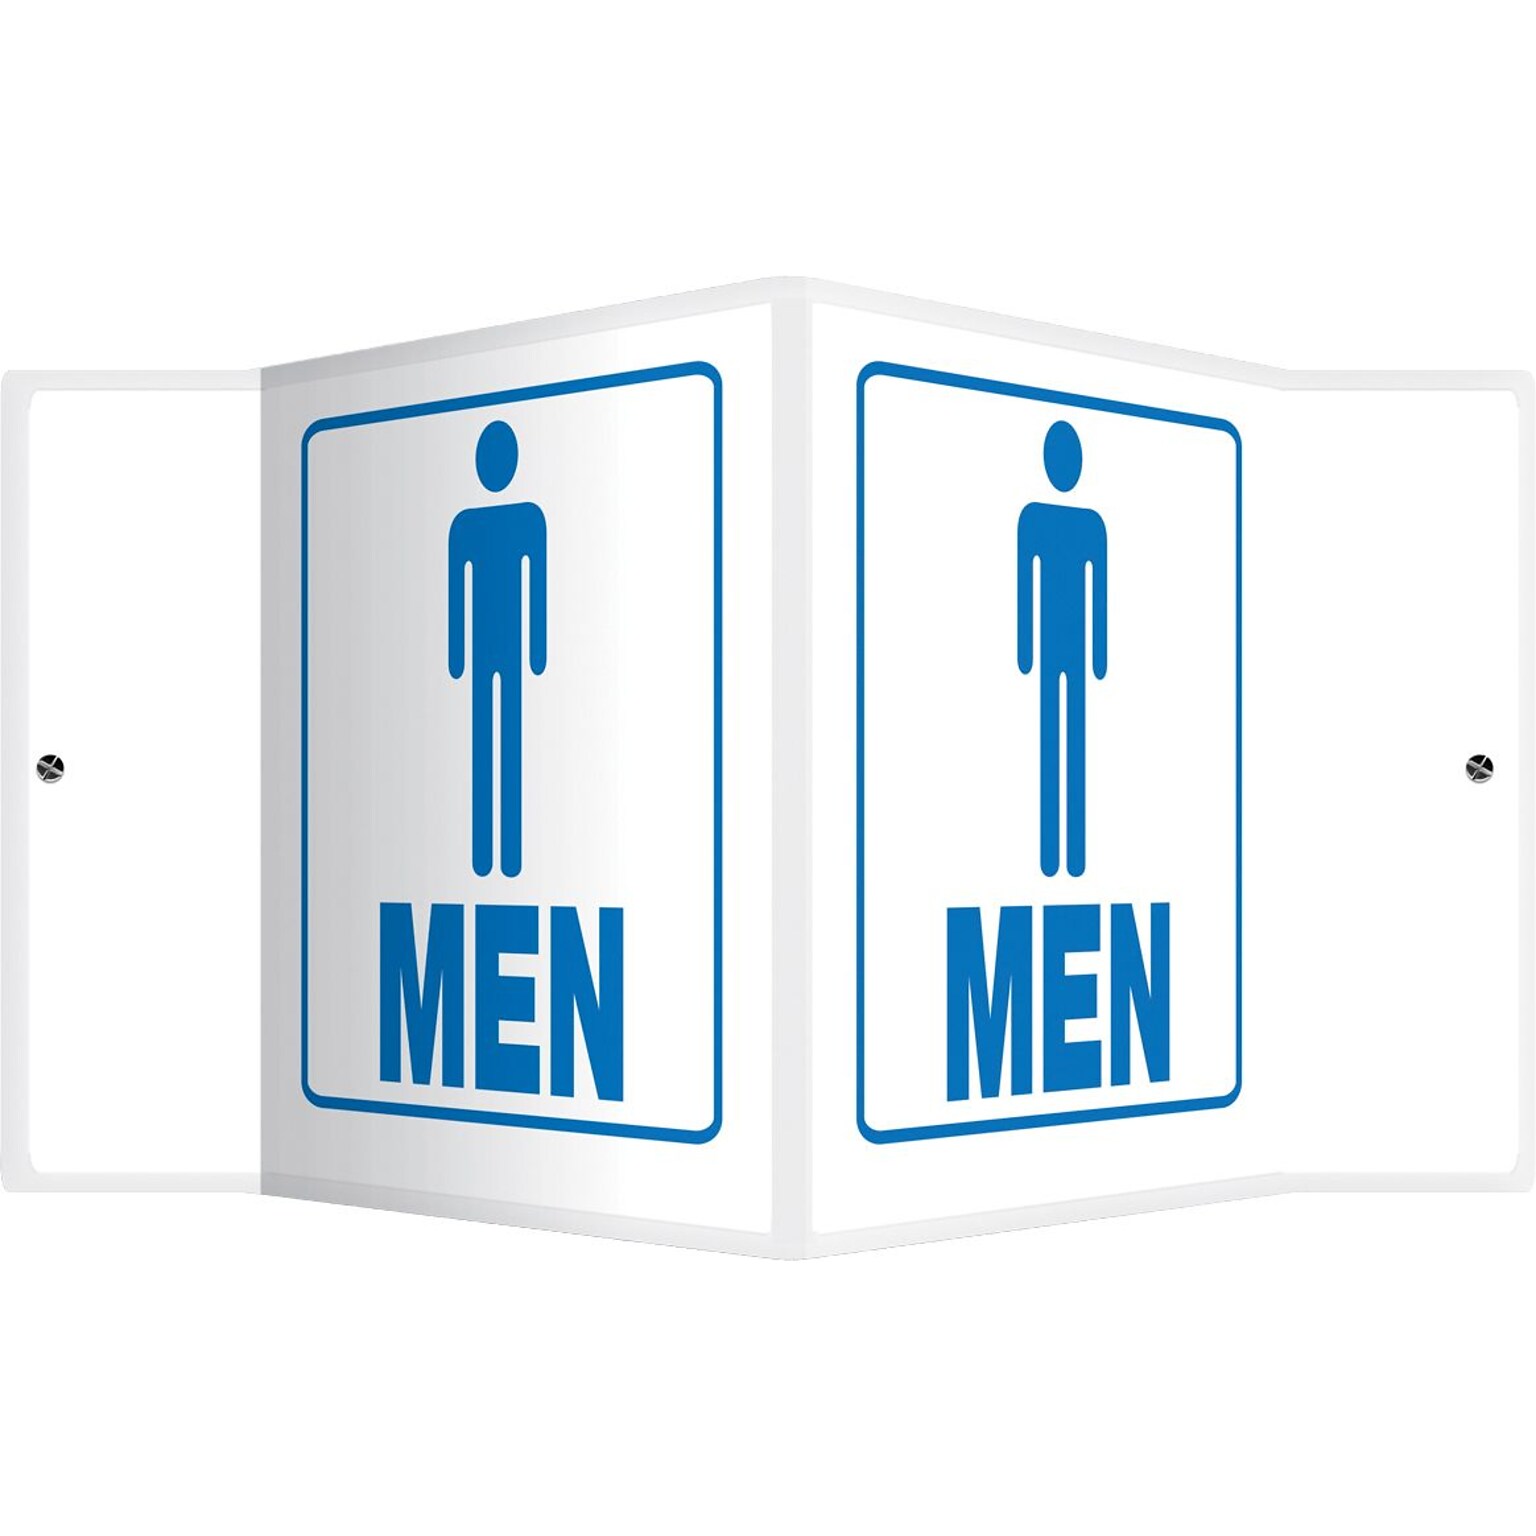 Accuform Signs® Men Restroom Projection Sign, Blue/White, 6H x 5W, 1/Pack